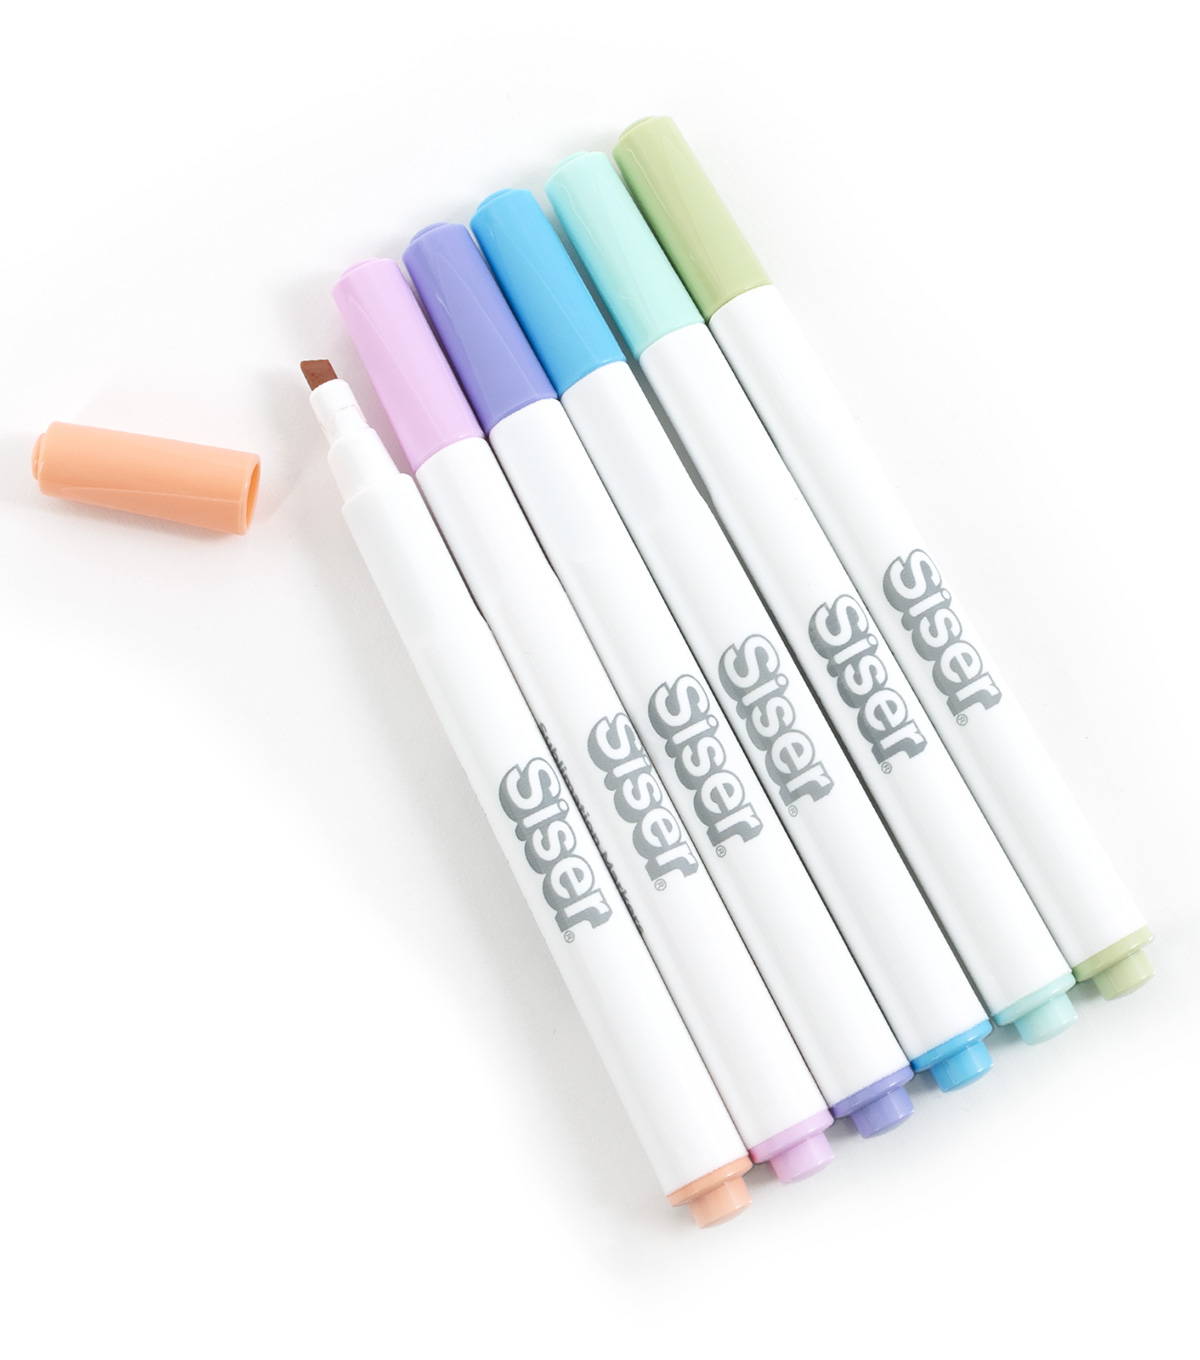 Siser Sublimation Markers in Pastel Colors